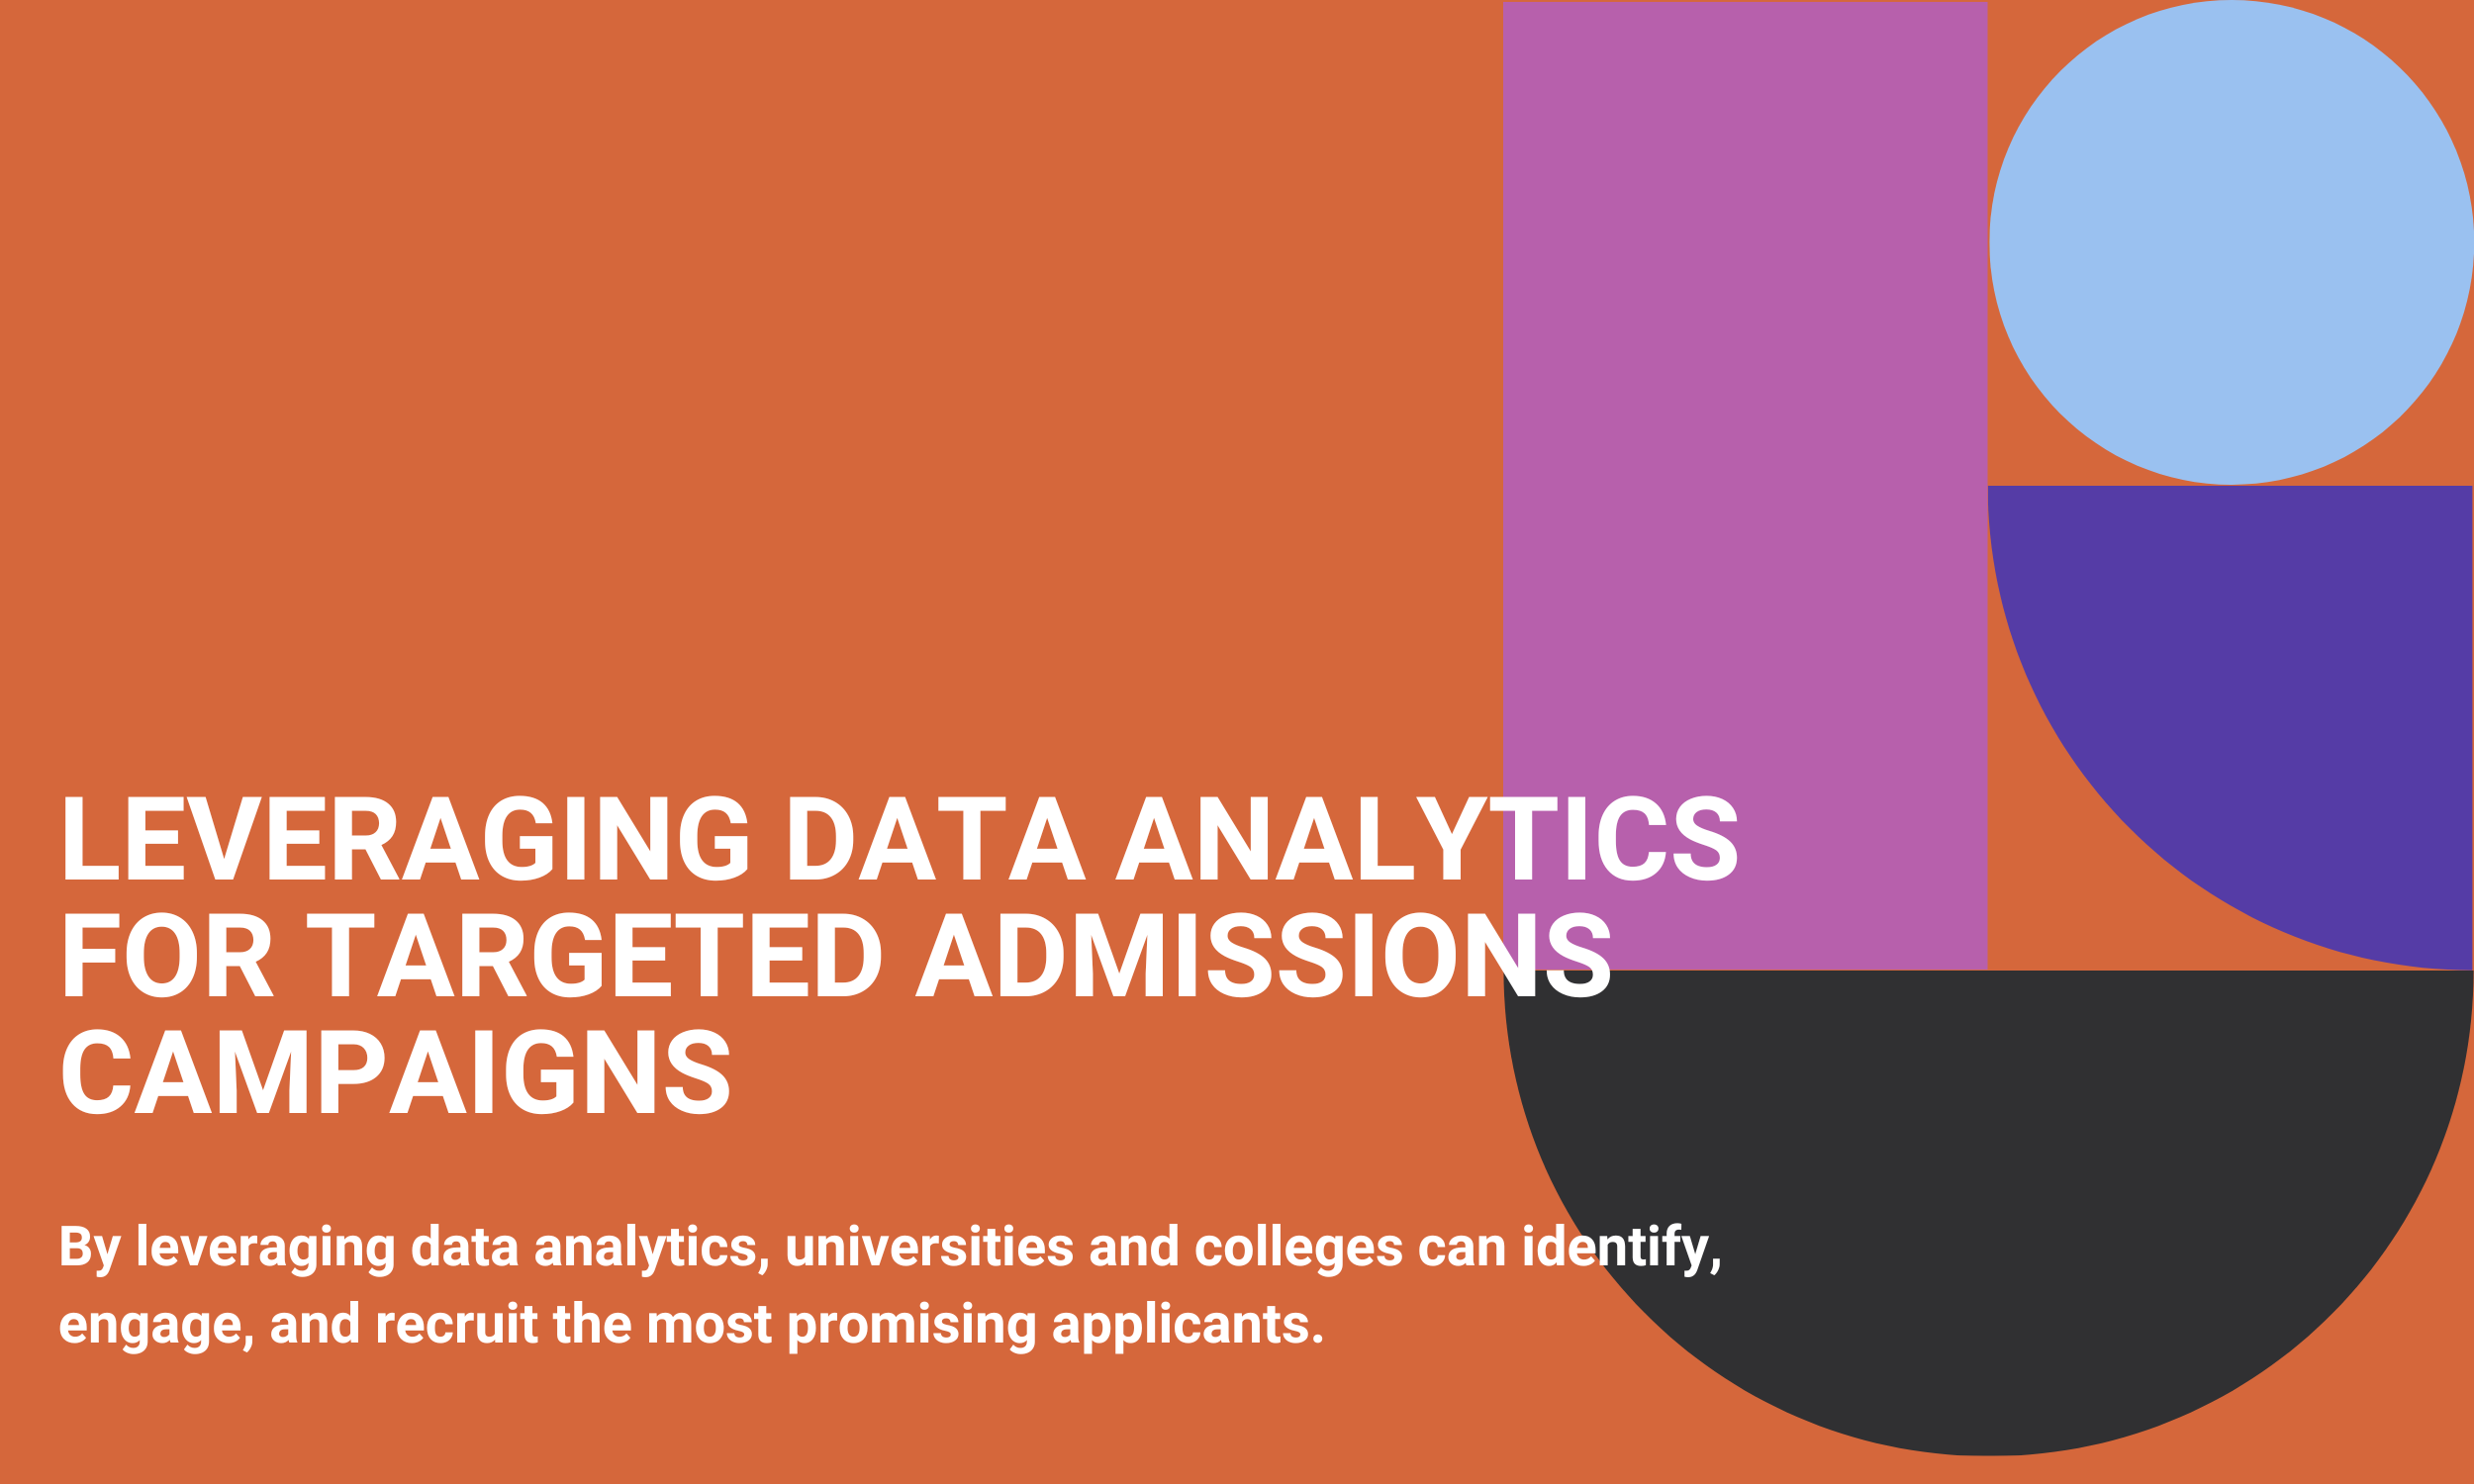 Leveraging Data Analytics for Targeted Admissions Campaigns